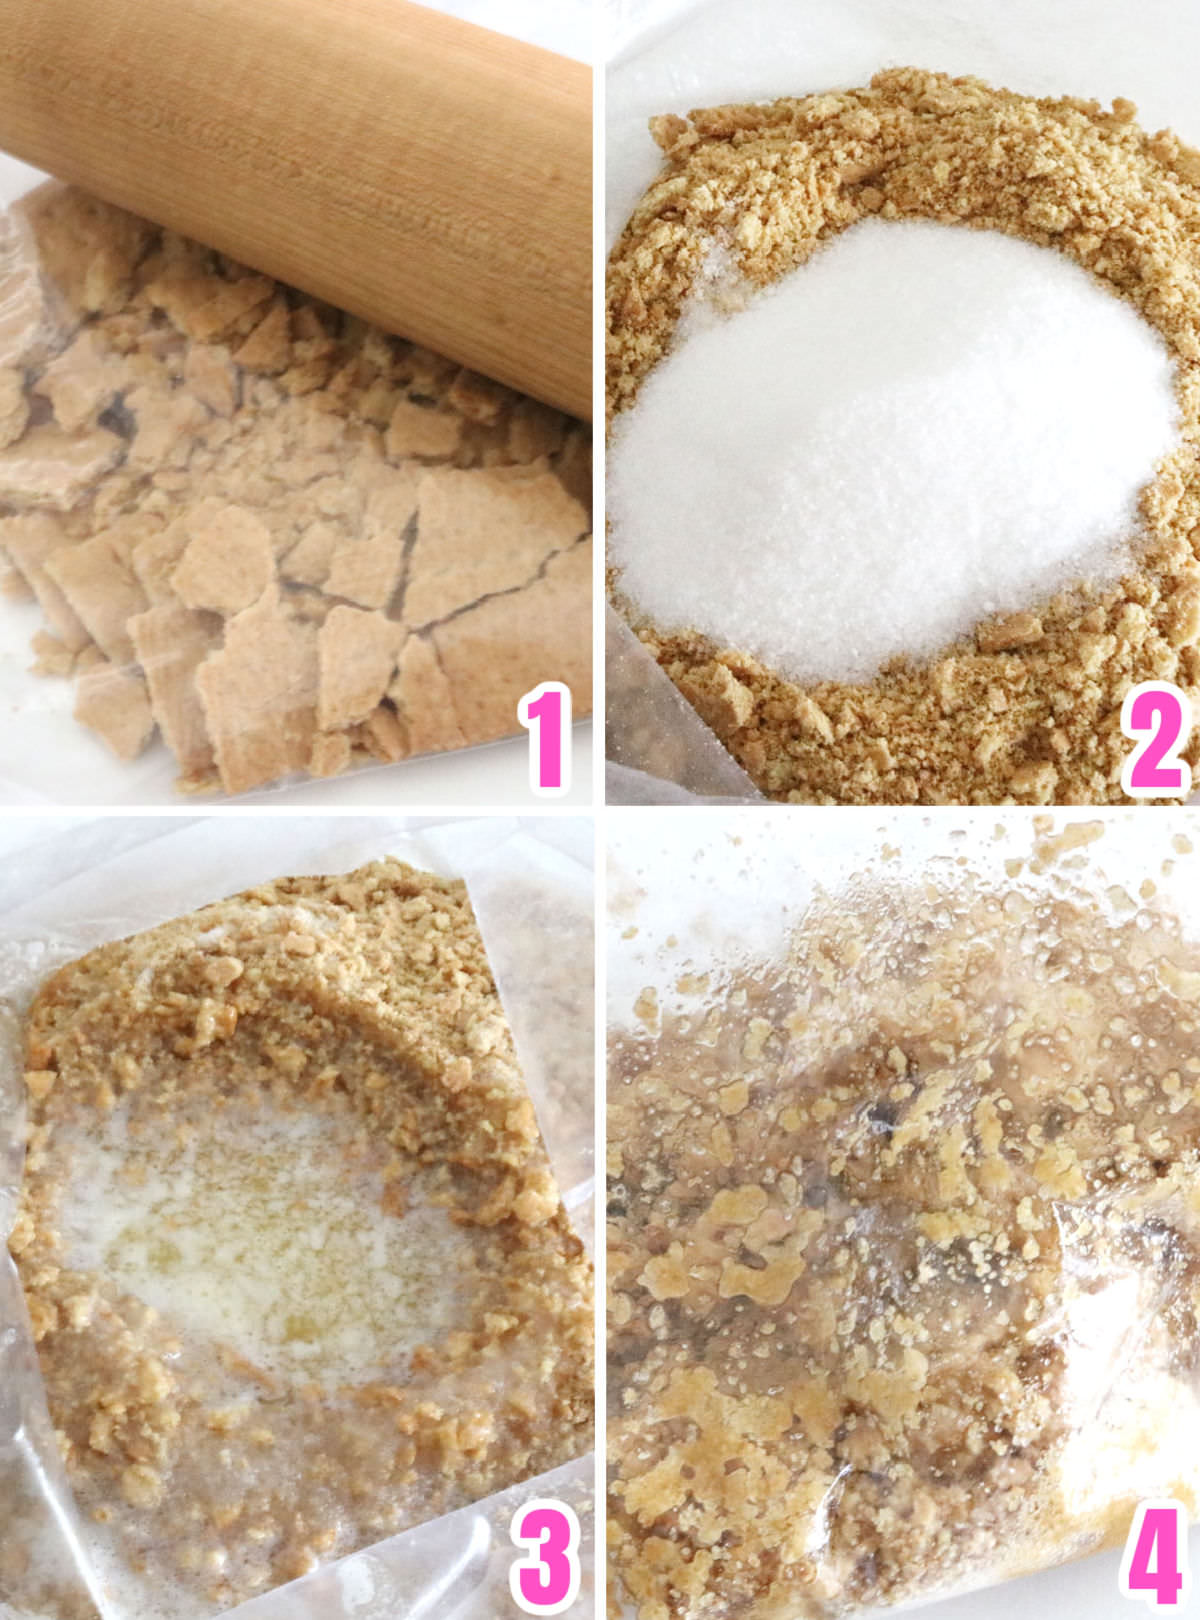 Collage image showing the steps for making a graham cracker crust.